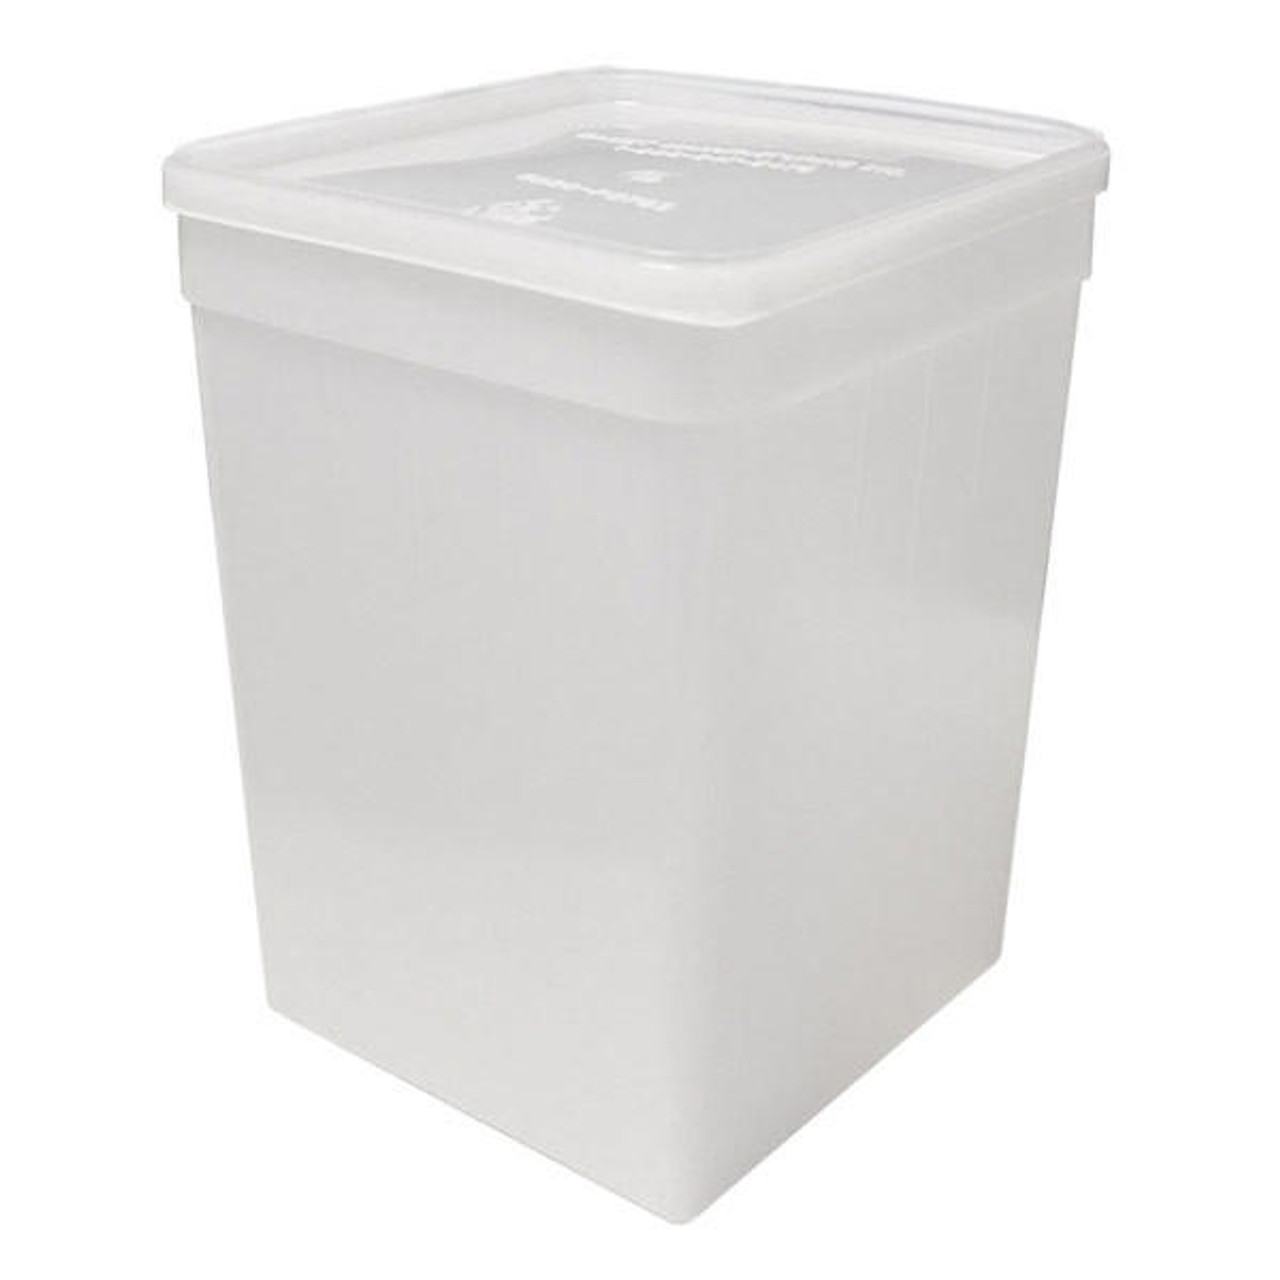 Half Gallon Square Container W/ Snap-On Lid